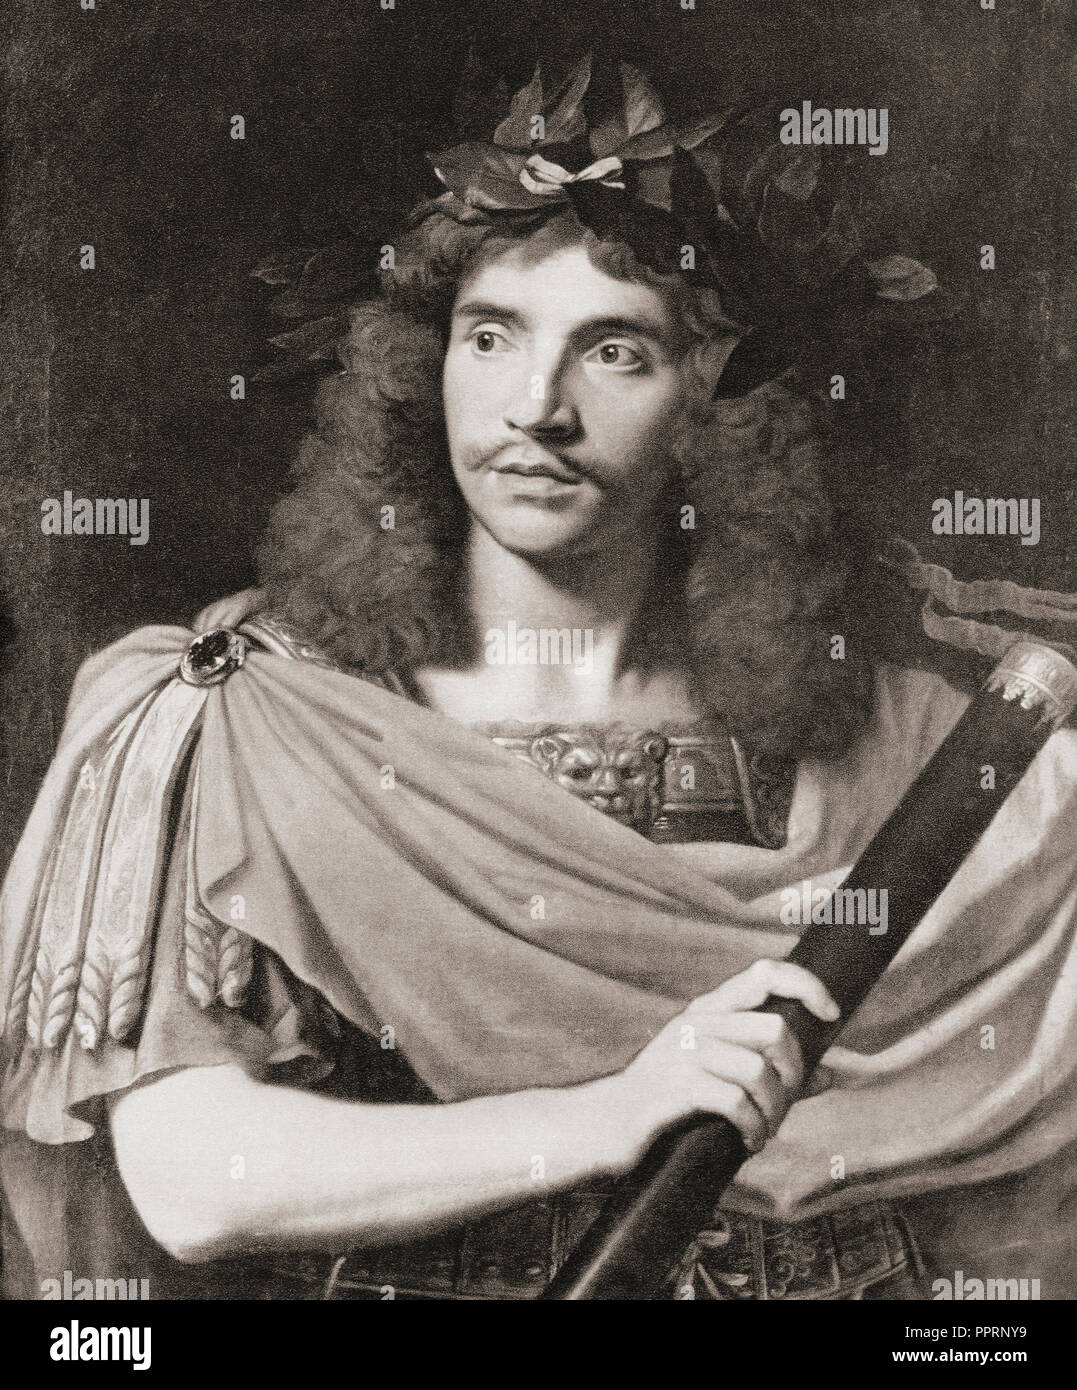 Jean-Baptiste Poquelin, known by his stage name Molière, 1622 – 1673.  French playwright, actor and poet. Stock Photo